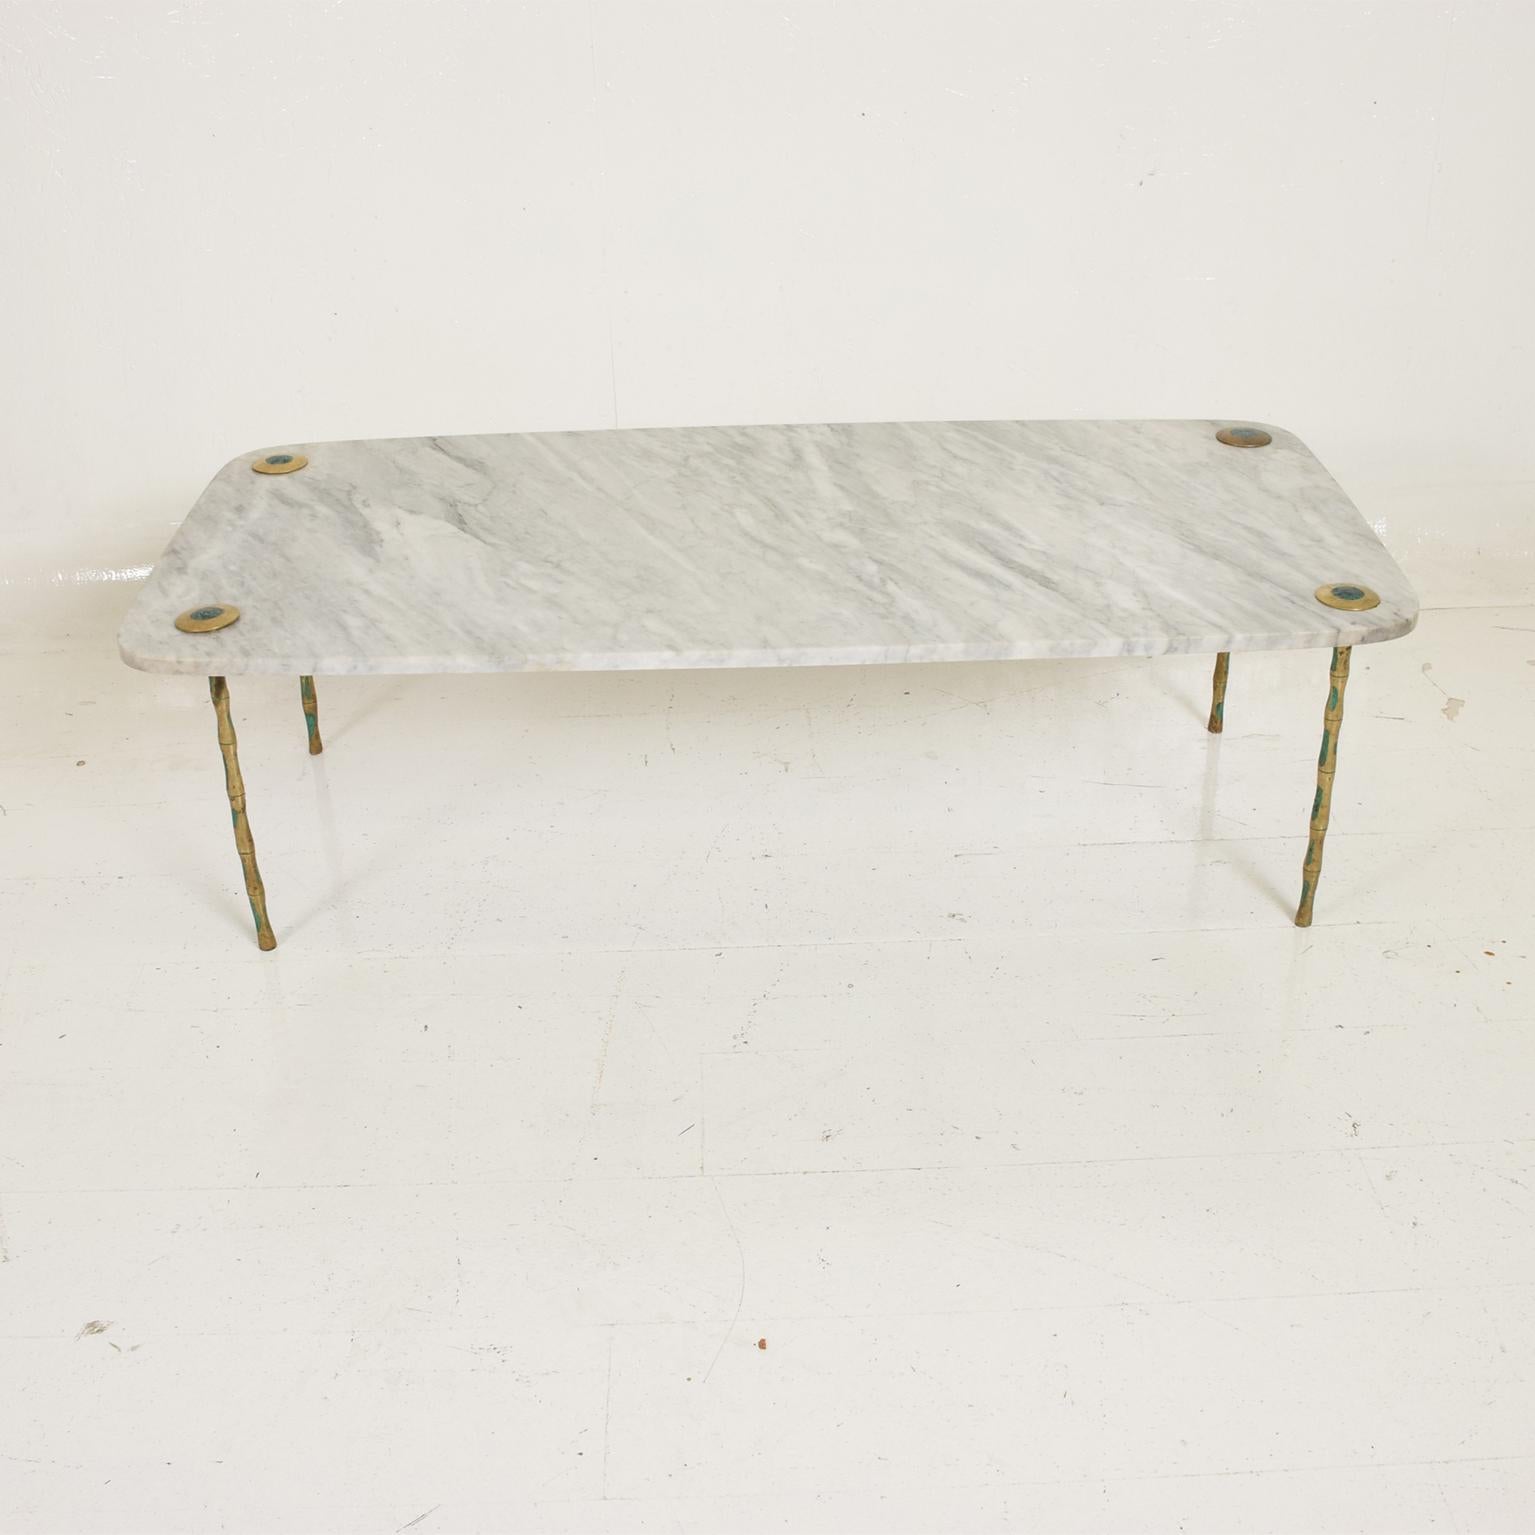 For your consideration, a midcentury Mexican modernist coffee table in marble brass and malachite by Pepe Mendoza.

Vintage legs with original caps. New Carrara marble-top with a sculptural shape. Reinforced with steel base (underneath the marble